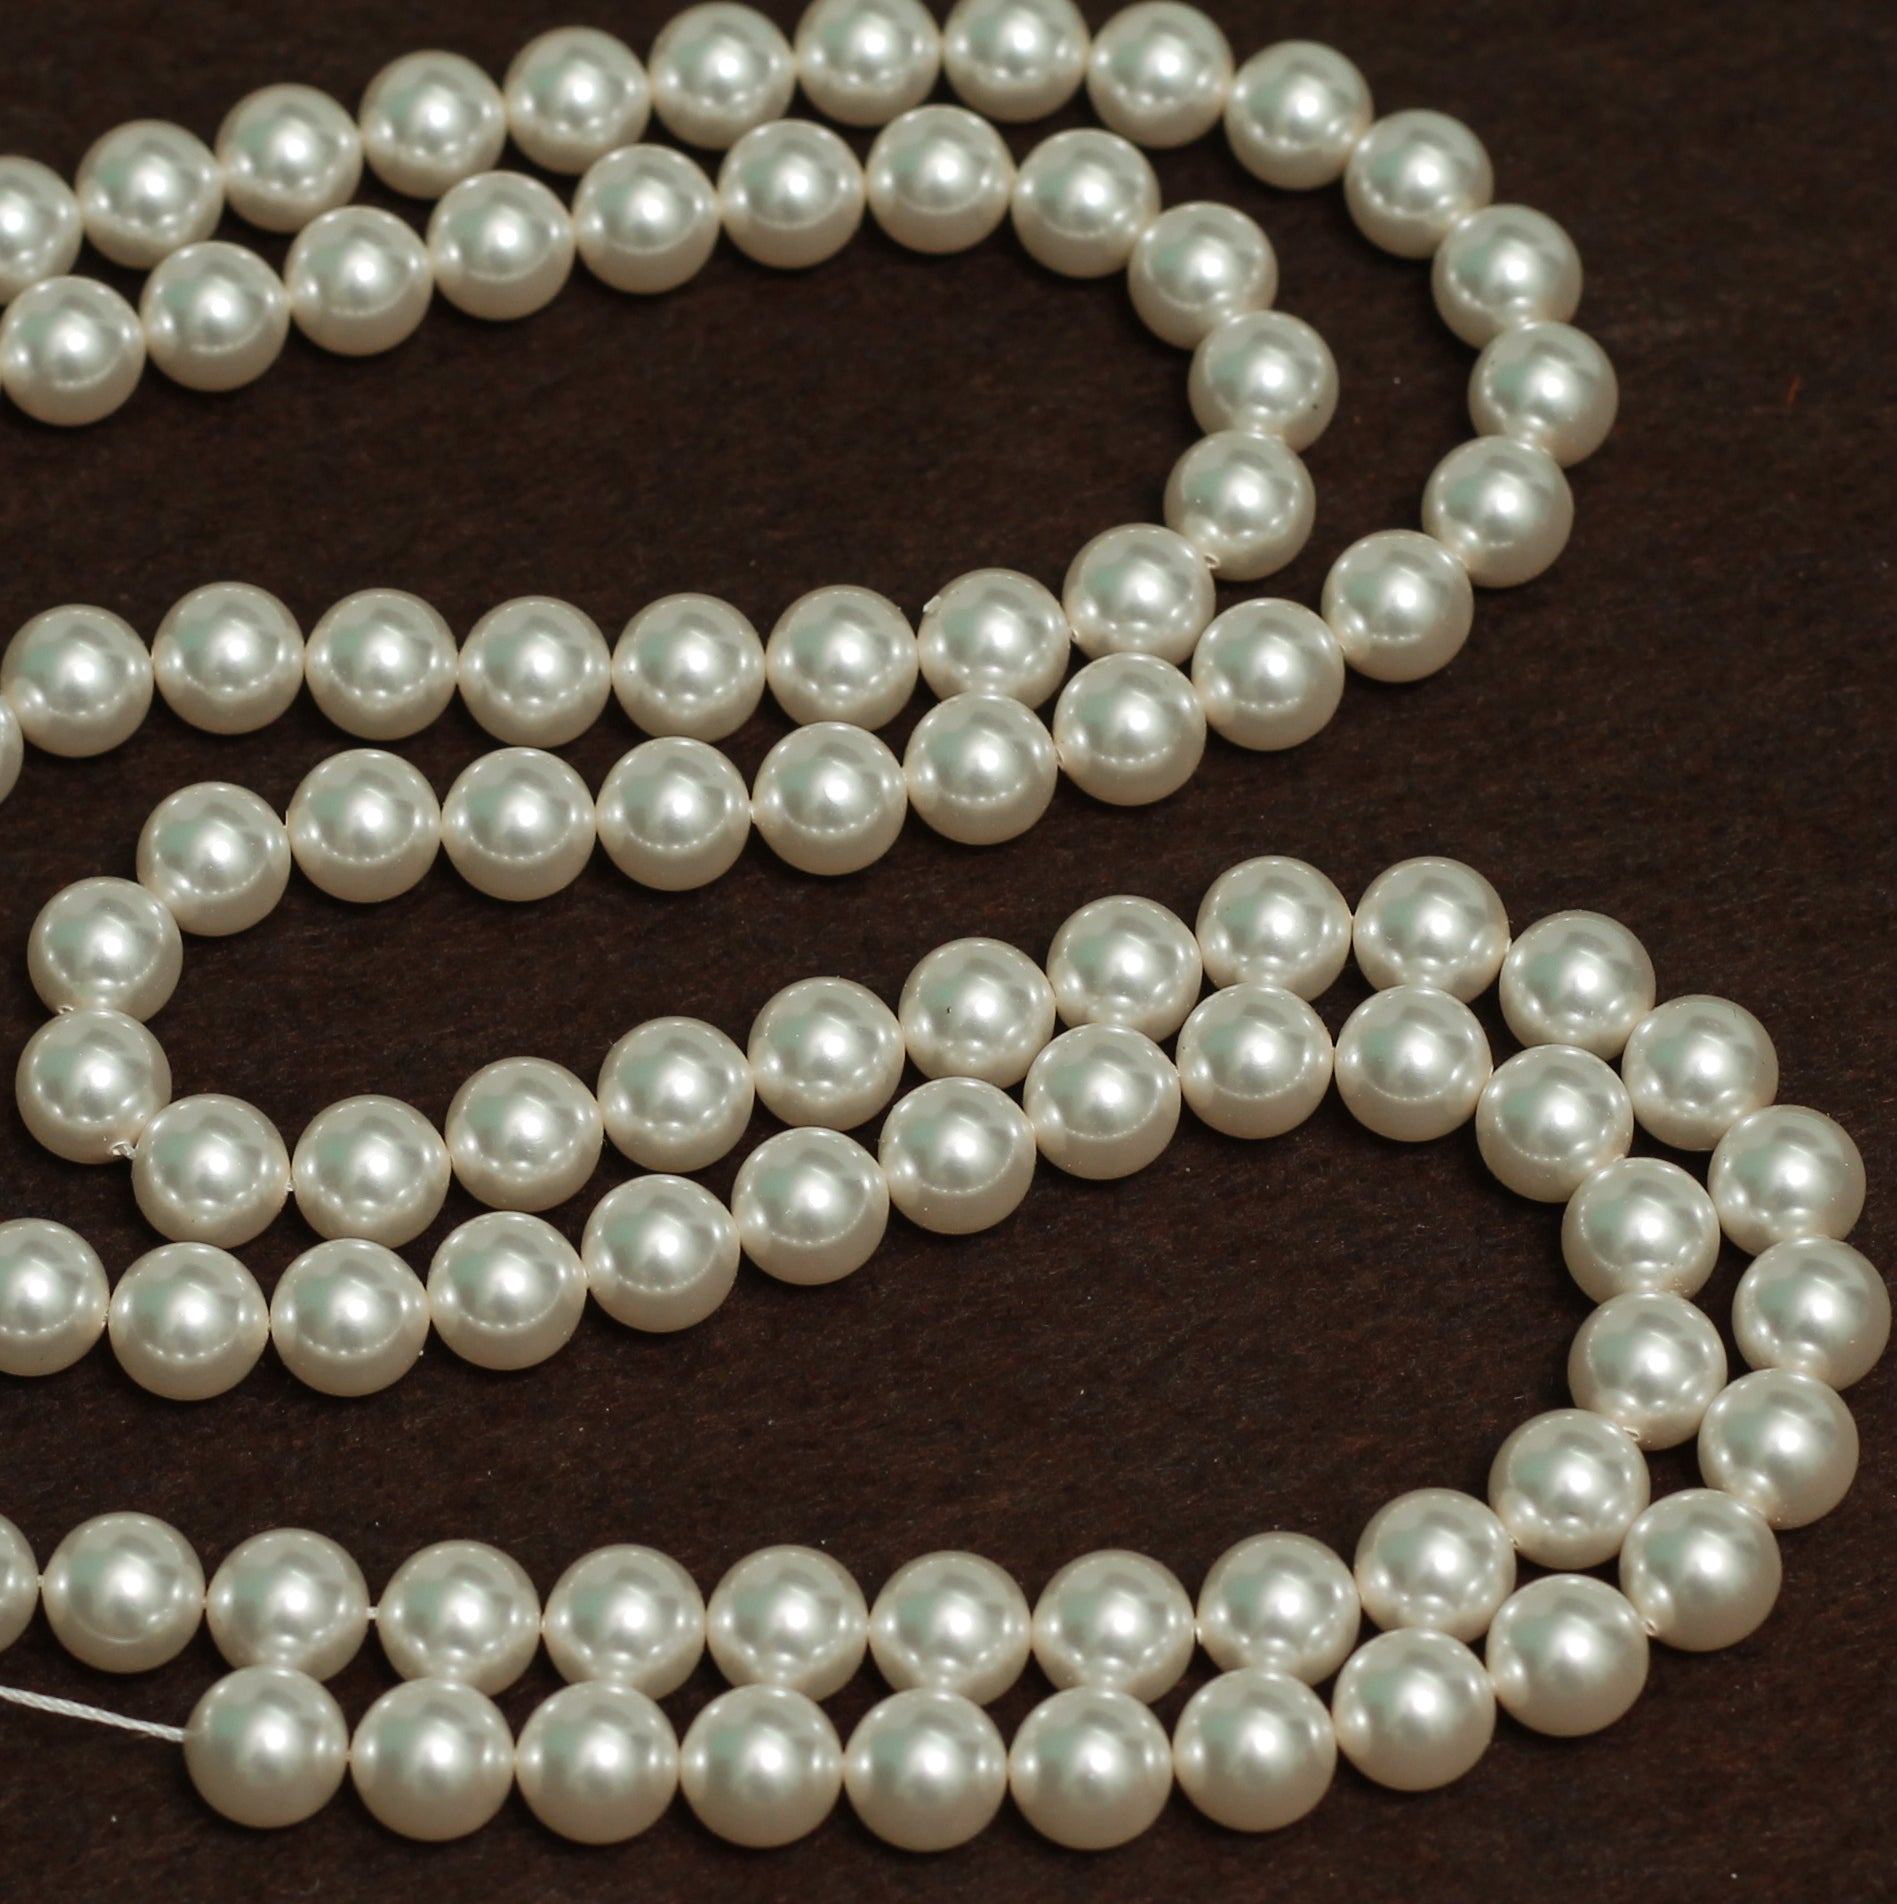 Sooyee Pearl Beads for Craft, 780pcs Ivory Faux Fake Pearls, 10 MM Sew on  Pearl Beads with Holes for Jewelry Making, Bracelets, Necklaces, Hairs